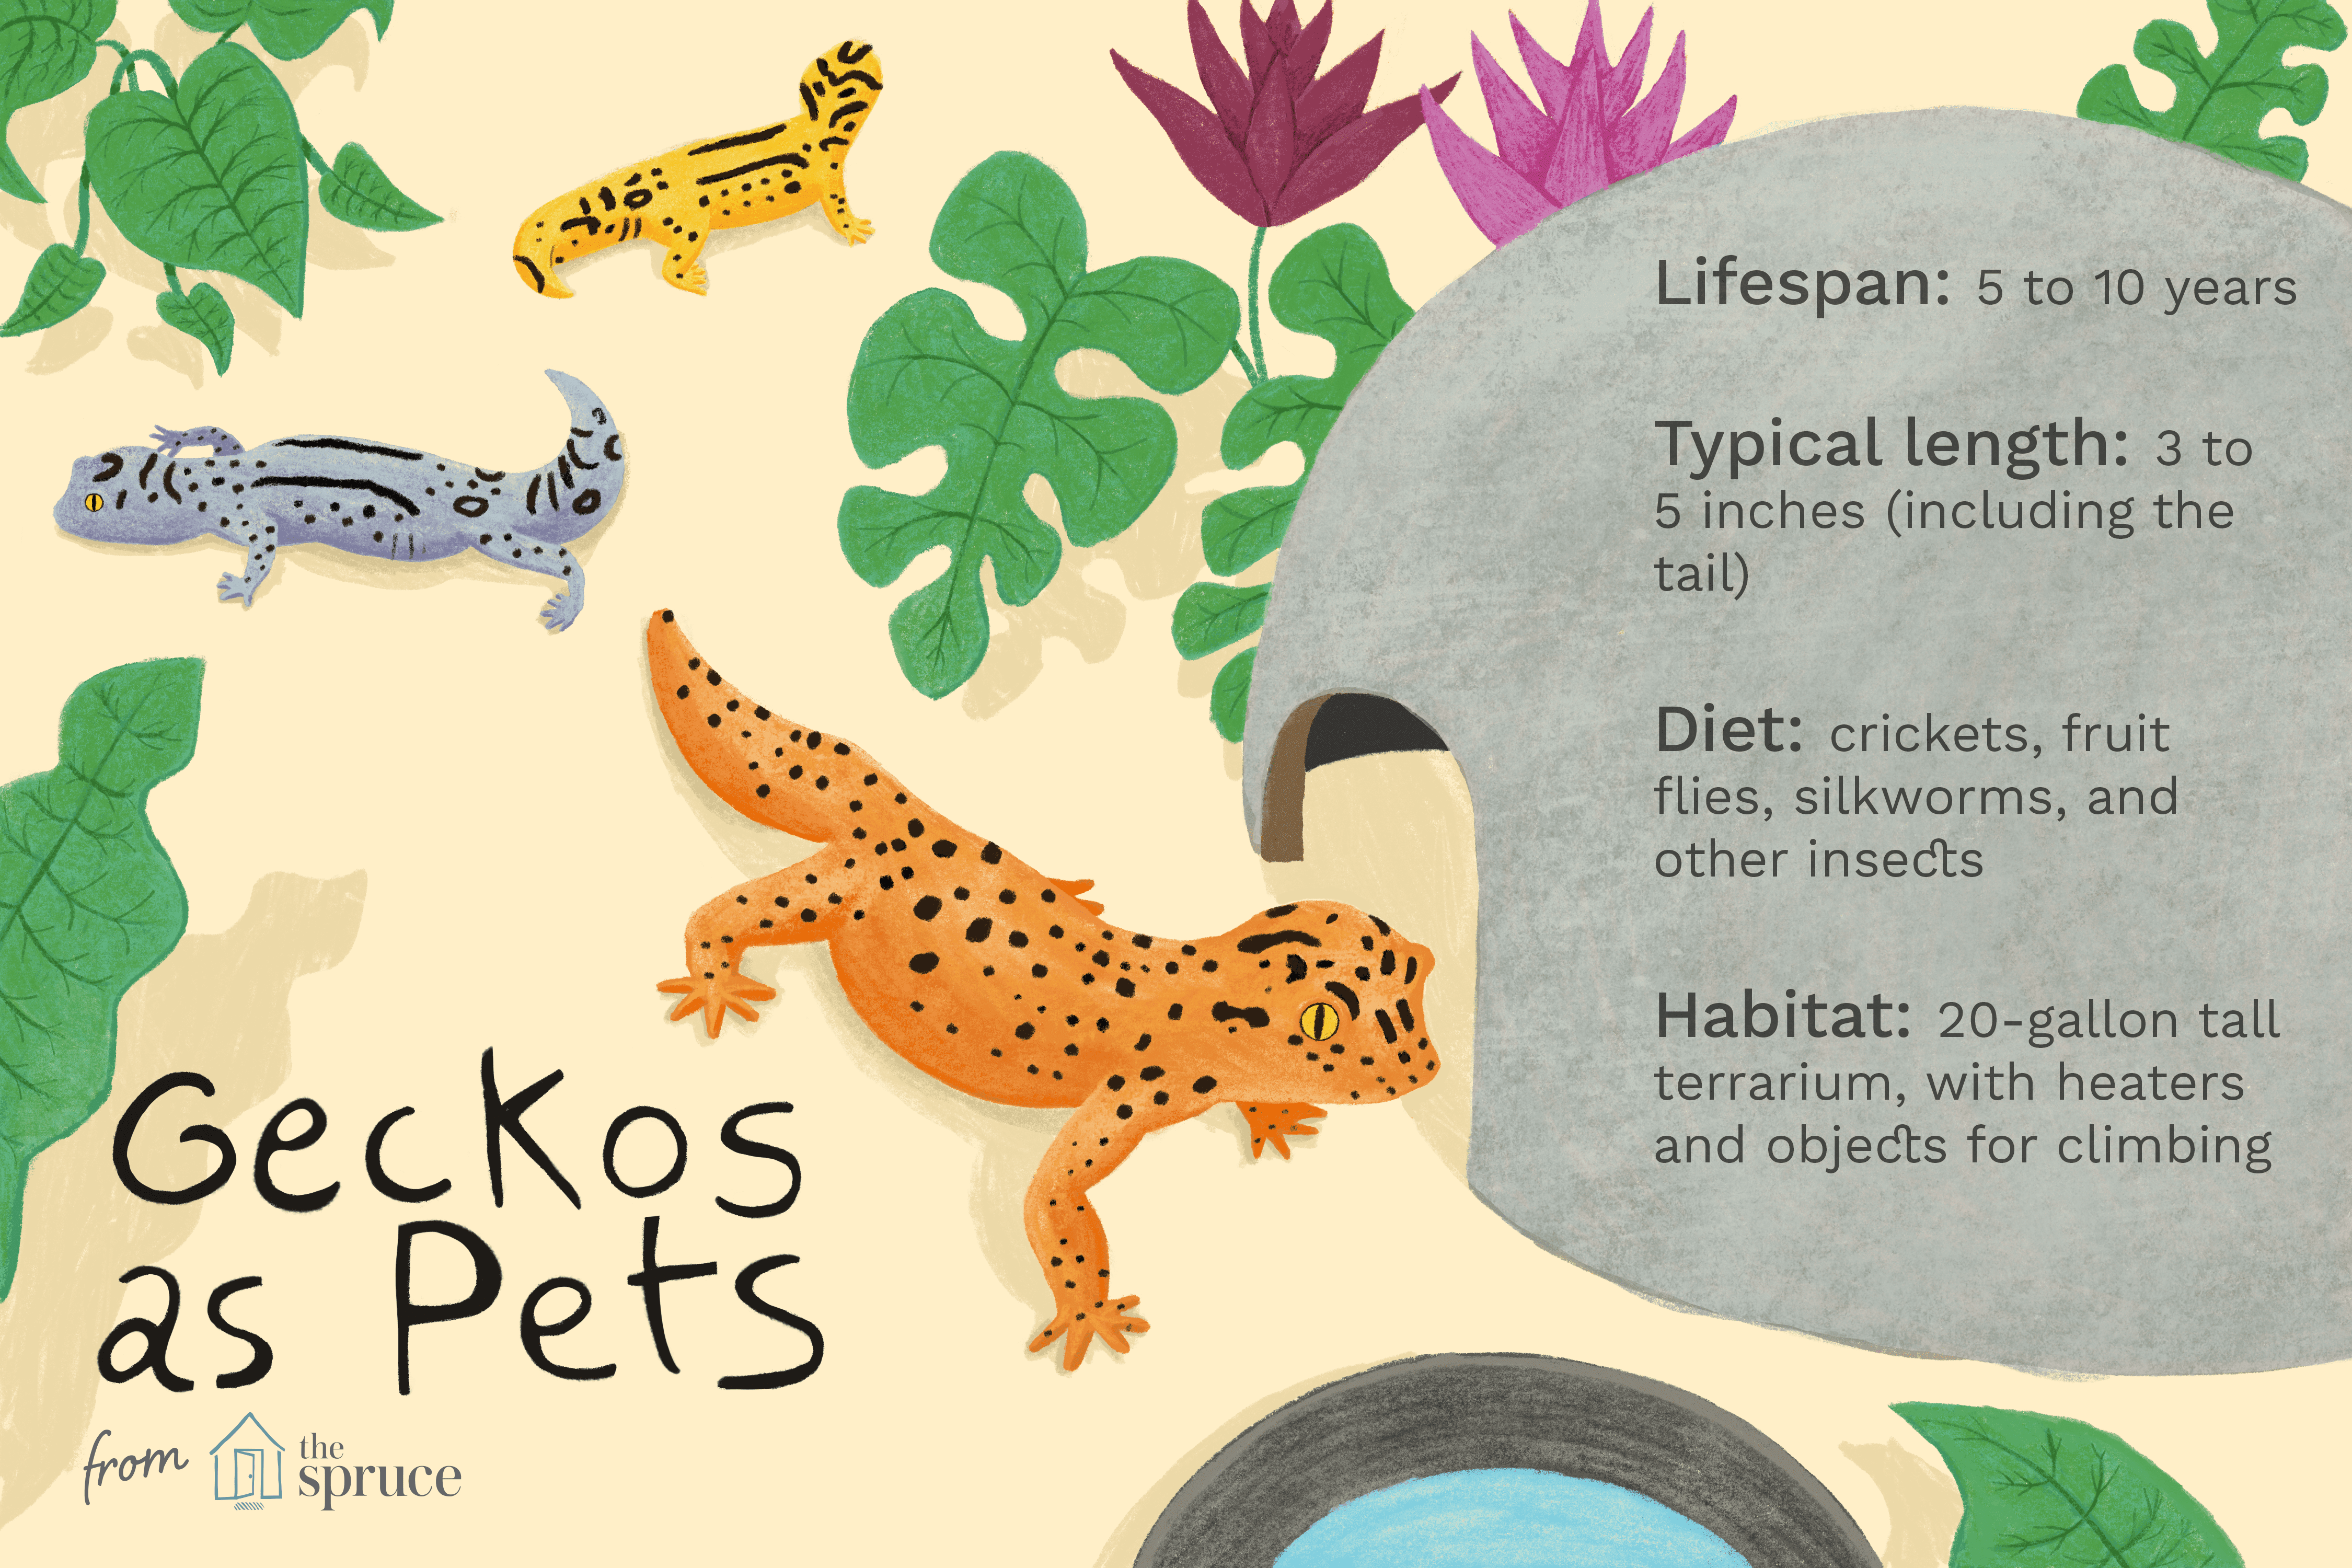 Illustration about geckos as pets